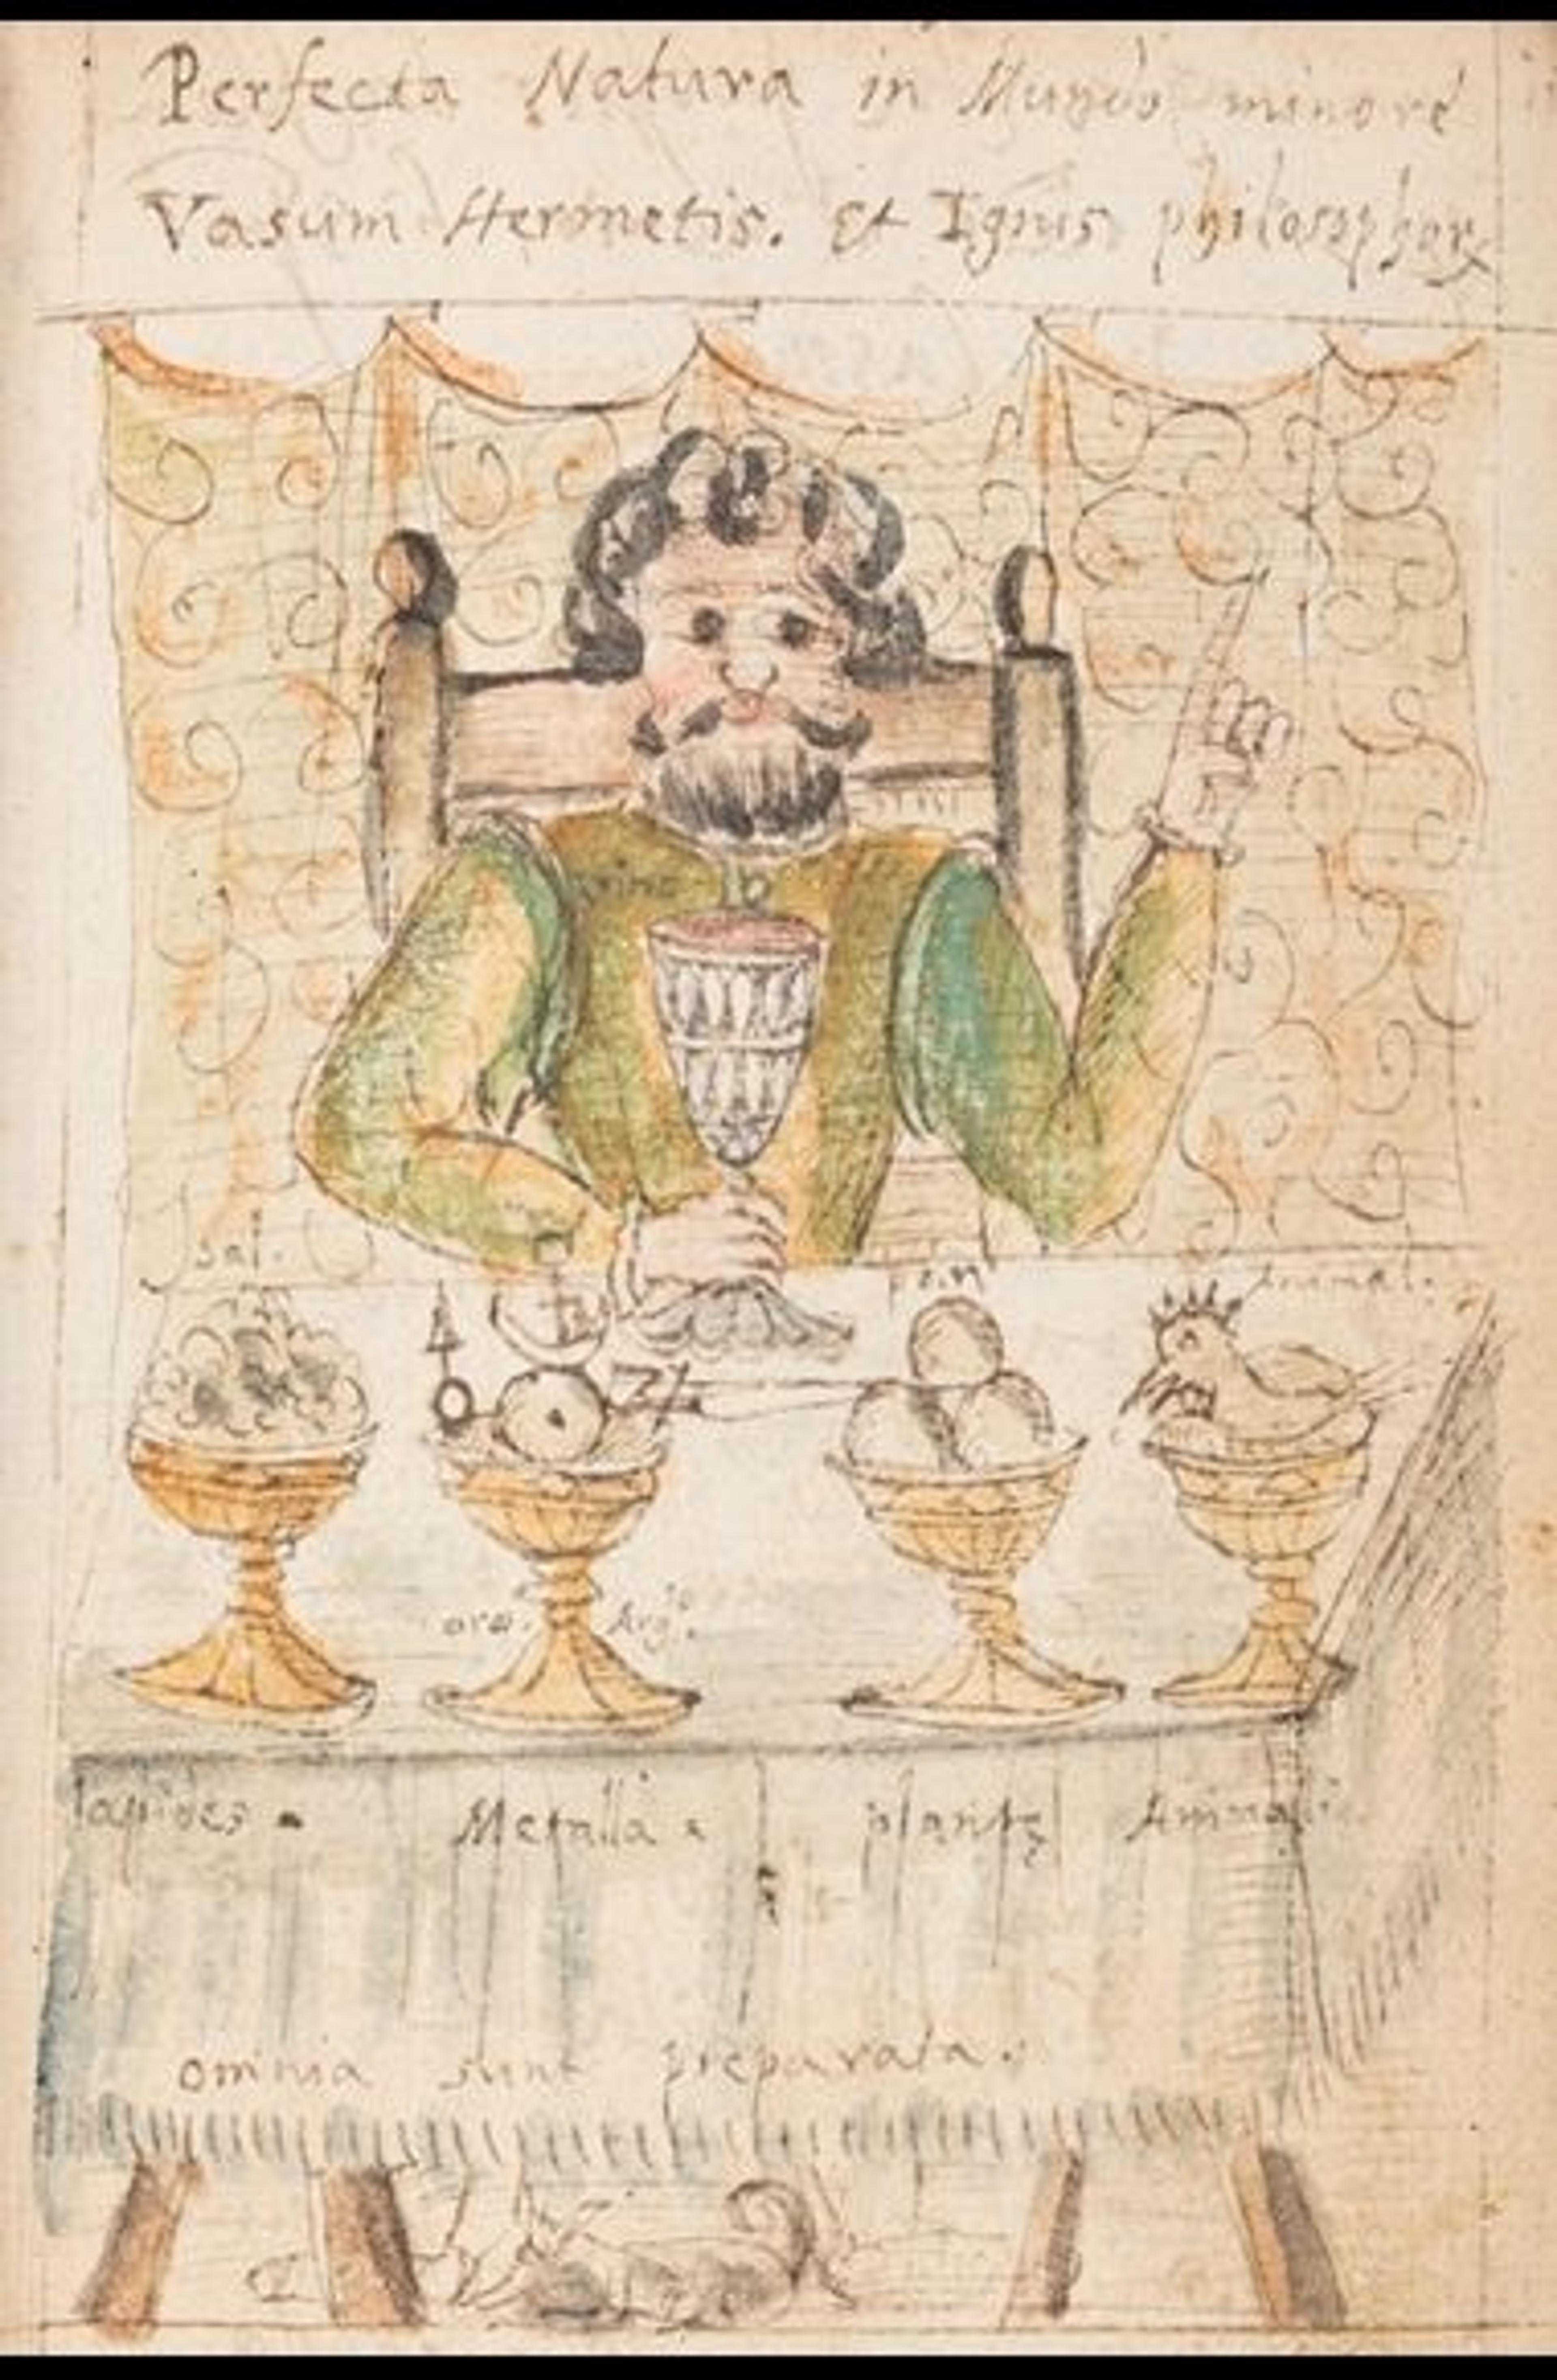 A hand drawn illustration of a man sitting at a table holding a goblet